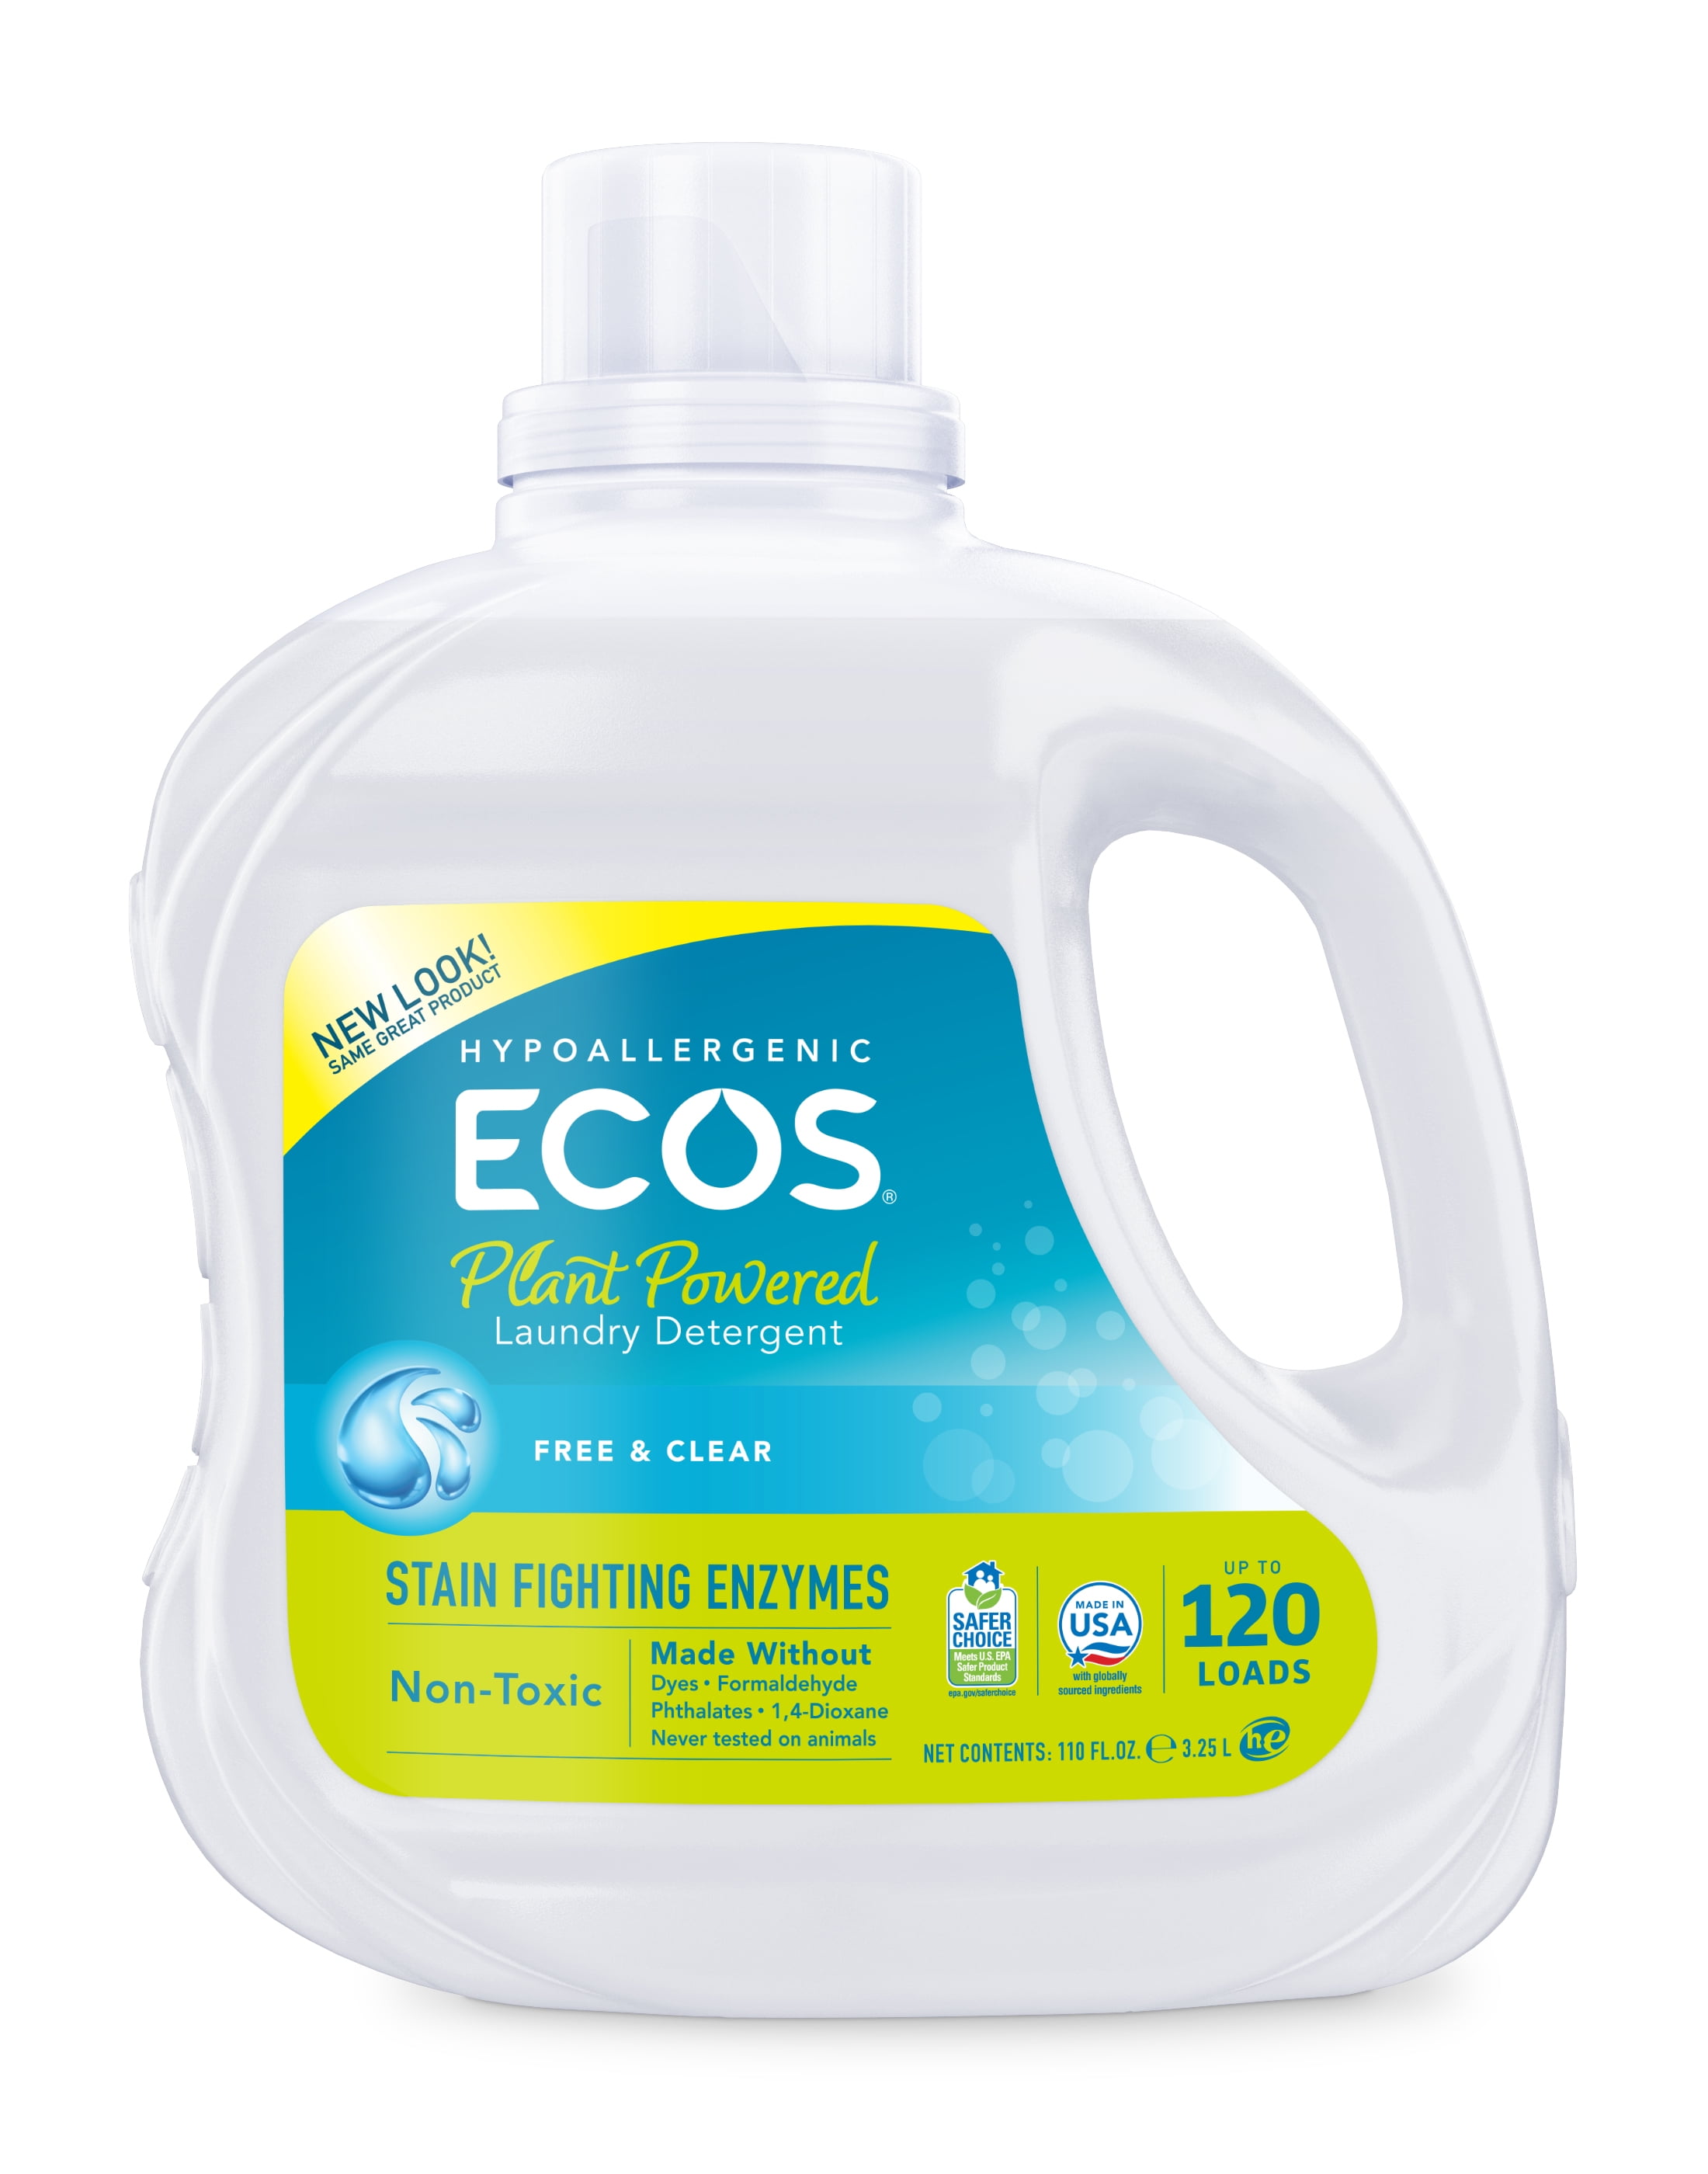 ECOS Plant Powered Liquid Laundry Detergent with Stain-Fighting Enzymes, Free & Clear, 120 Loads, 110 Ounce, Hypoallergenic for sensitive skin - Walma